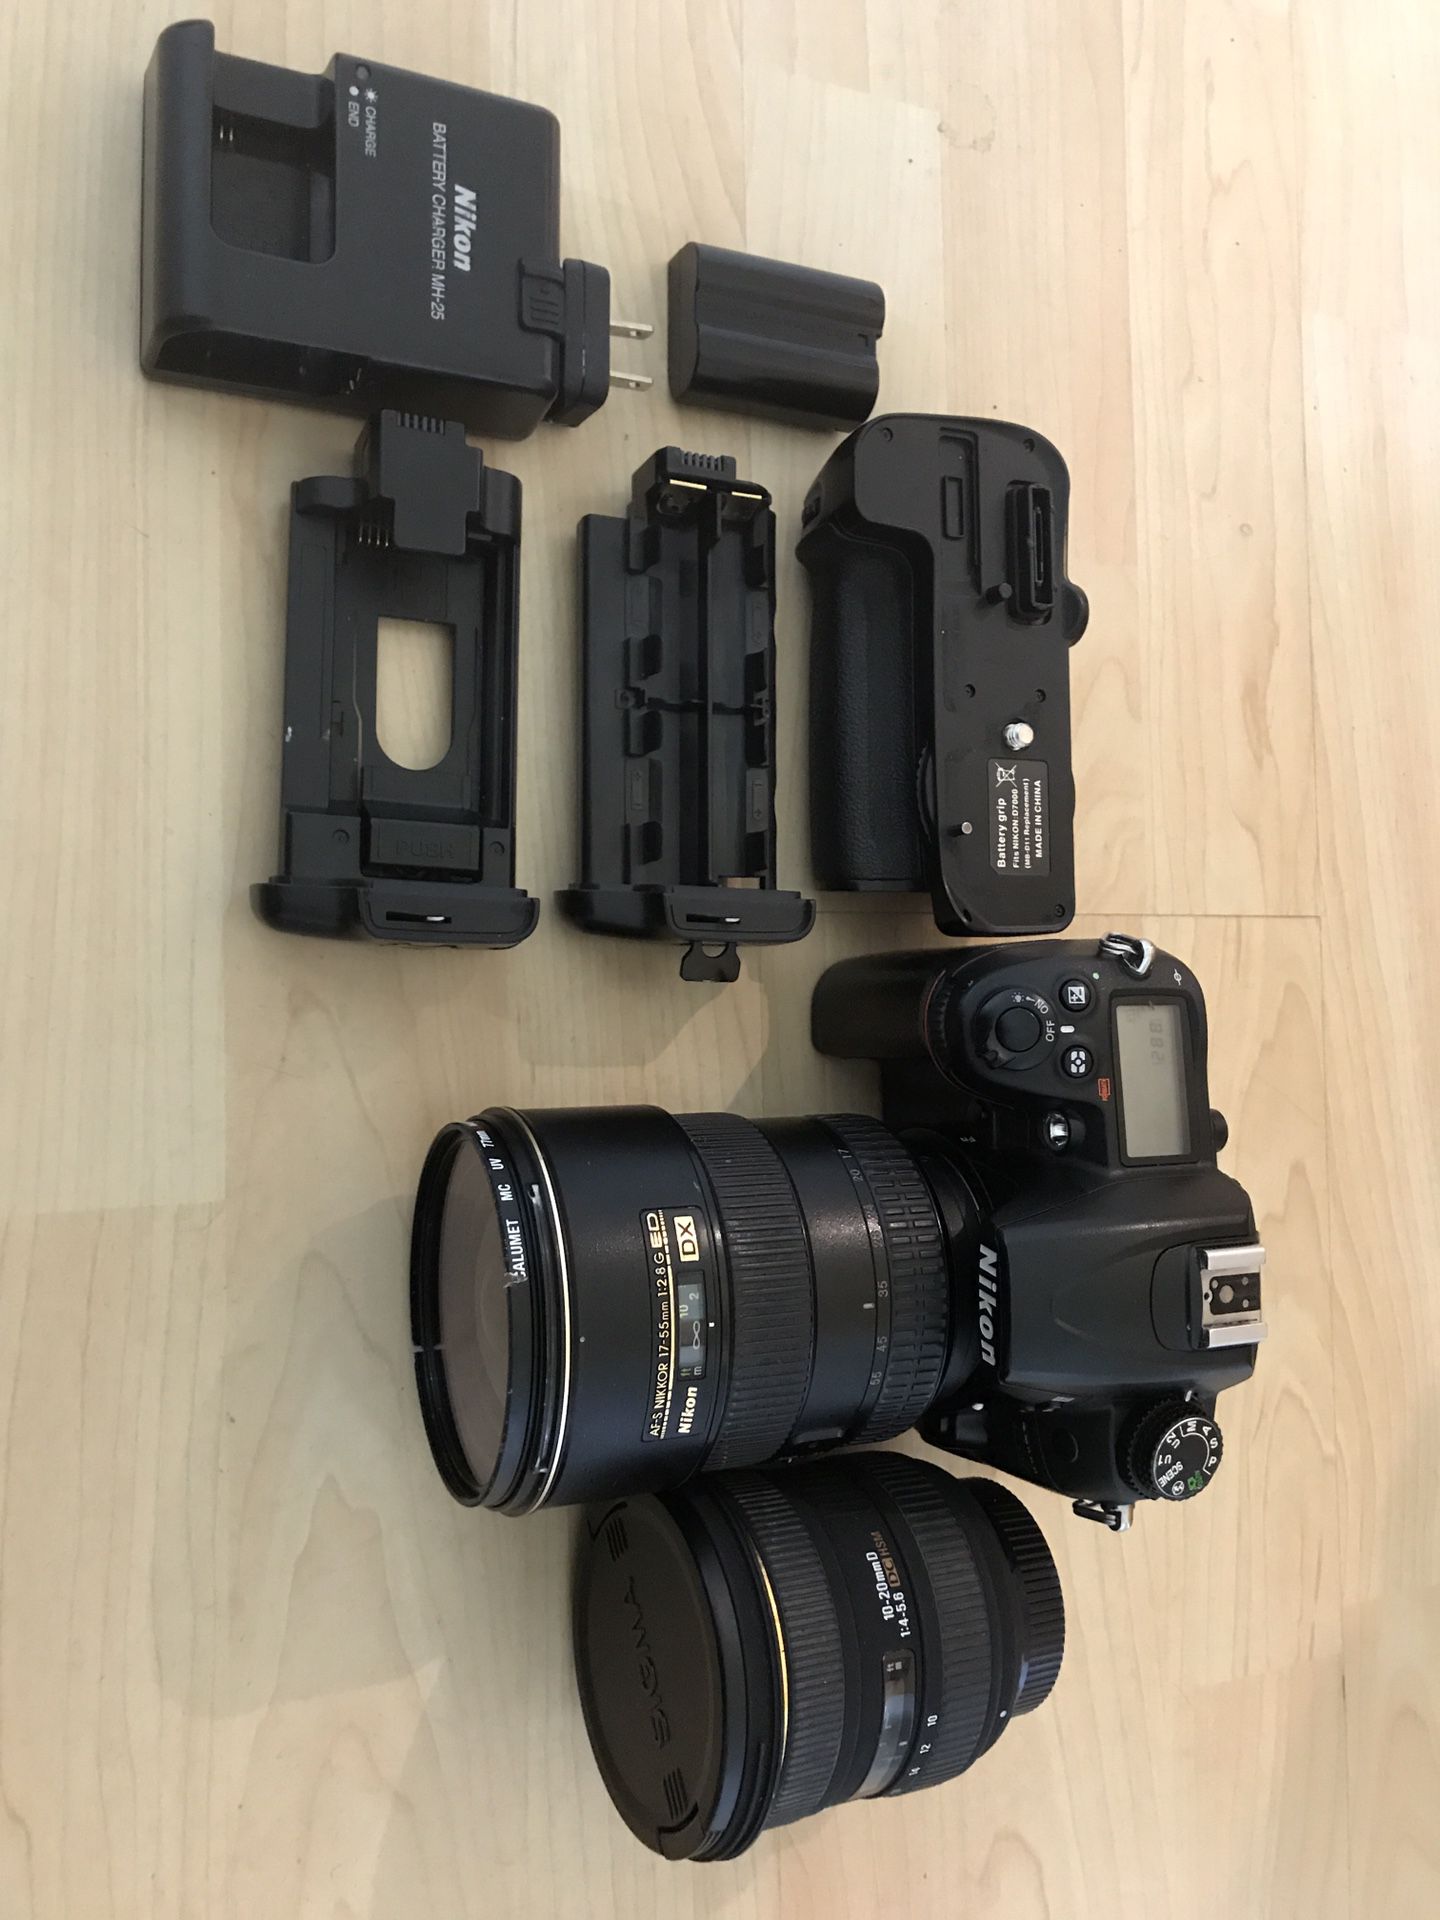 Nikon D7000 and lenses for sell !!!